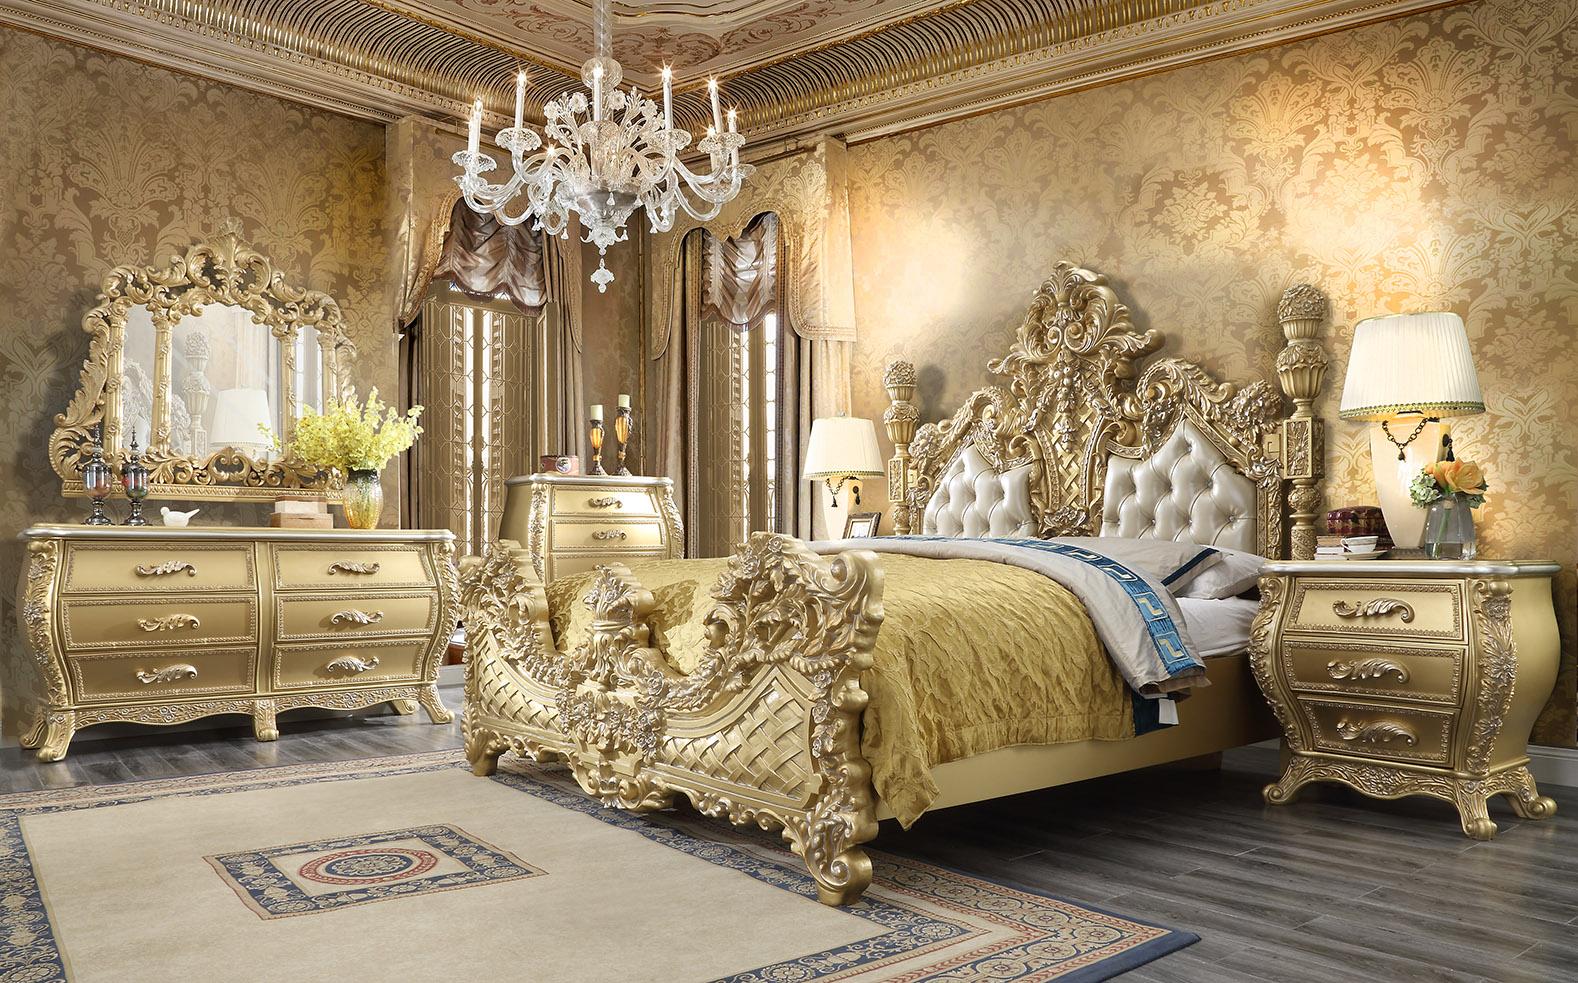 

    
Antique Gold & Leather CAL King Bedroom Set 5Pcs  Traditional Homey Design HD-1801
